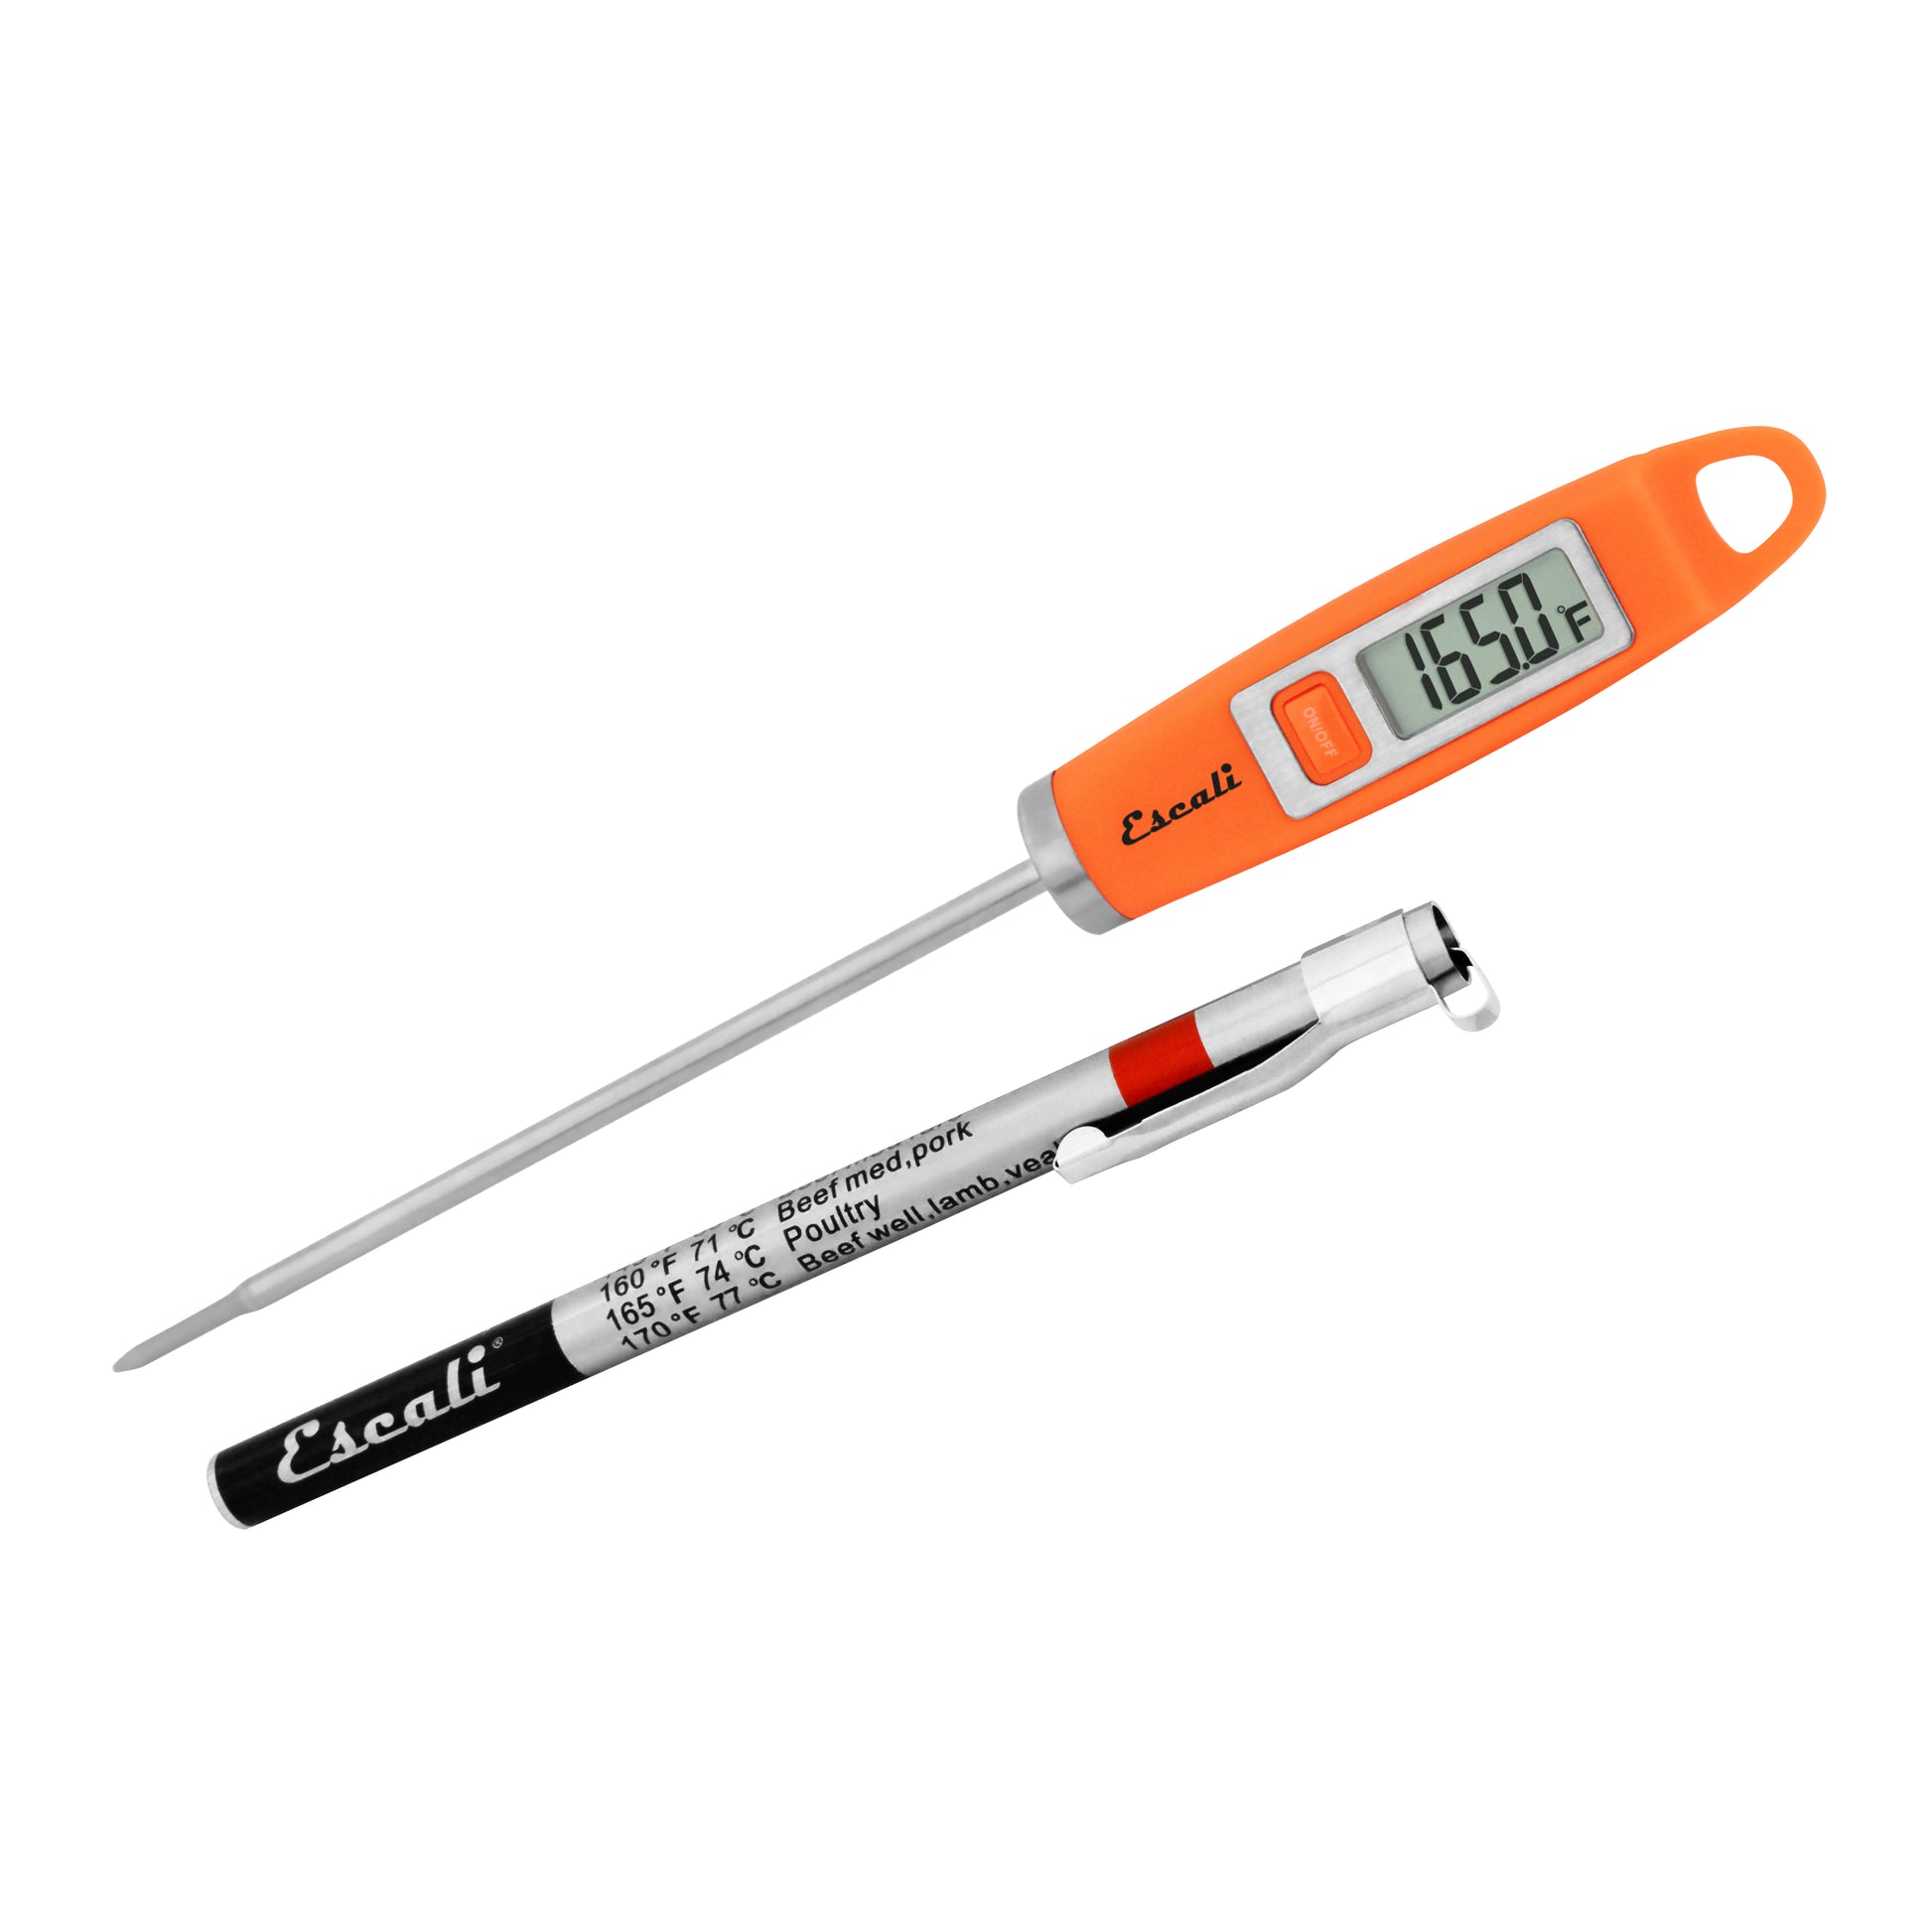 A photo of an orange DH1 Gourmet Digital Thermometer on a white background